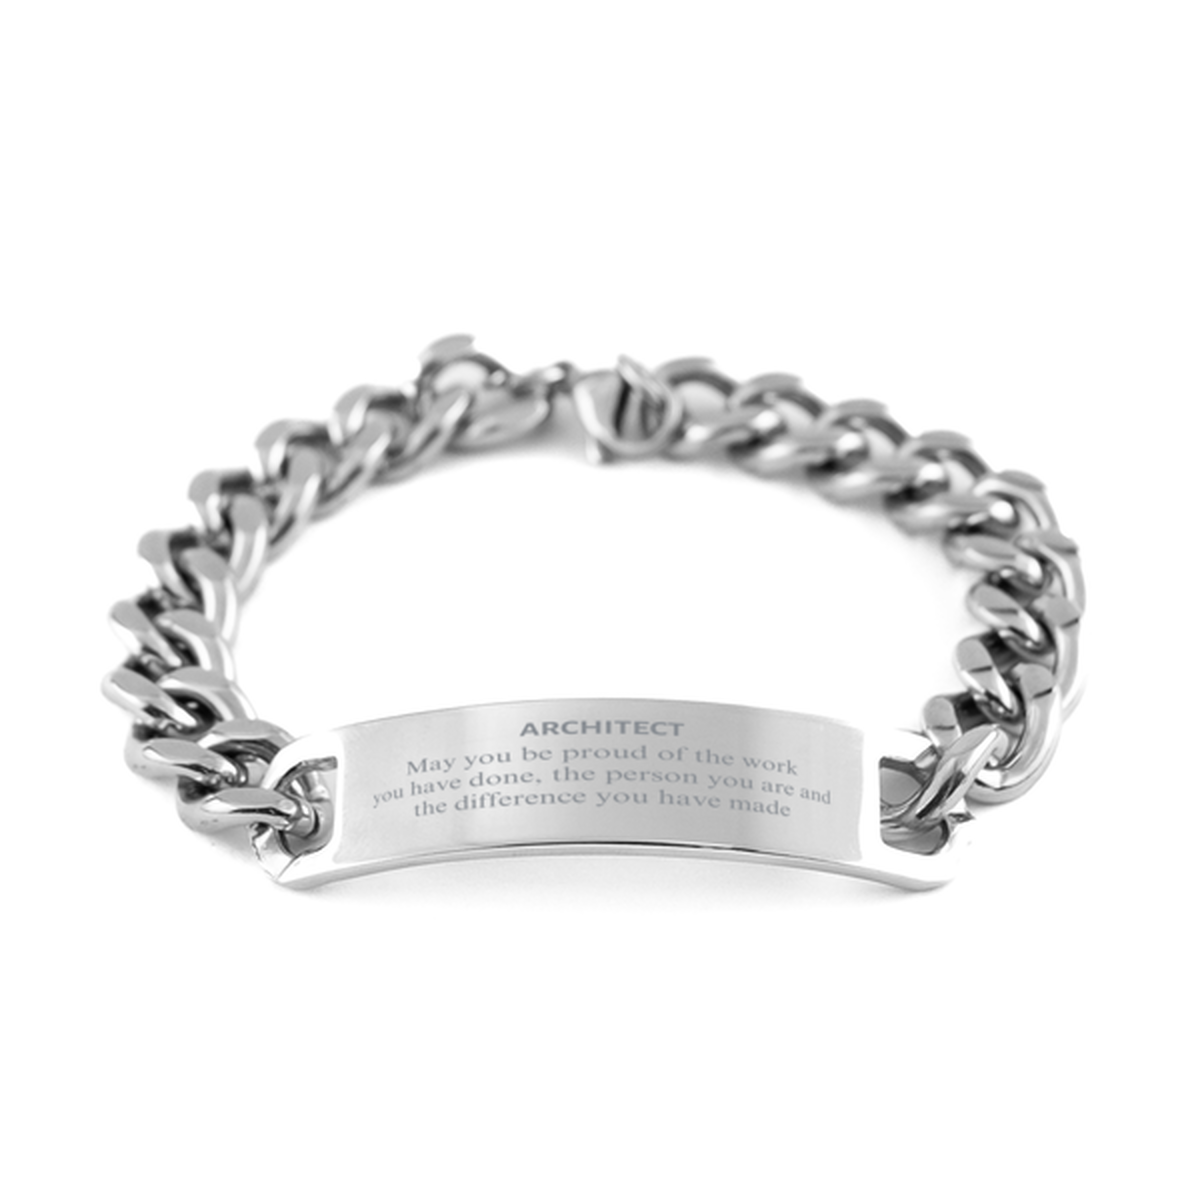 Architect May you be proud of the work you have done, Retirement Architect Cuban Chain Stainless Steel Bracelet for Colleague Appreciation Gifts Amazing for Architect